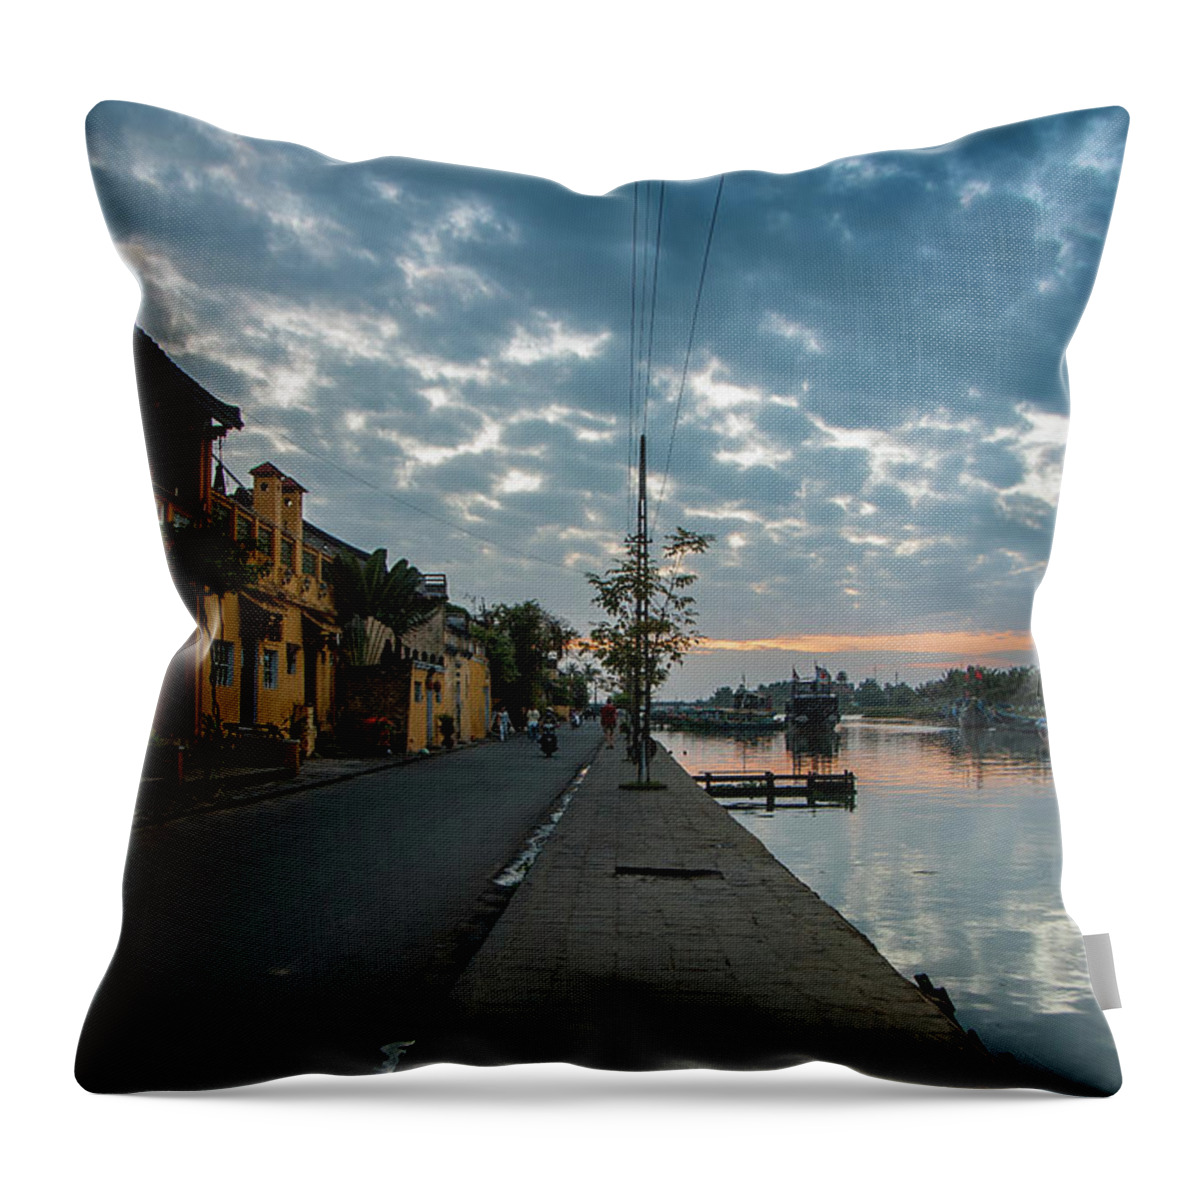 Tranquility Throw Pillow featuring the photograph Hoi An At Dawn by Arnaud Foucard